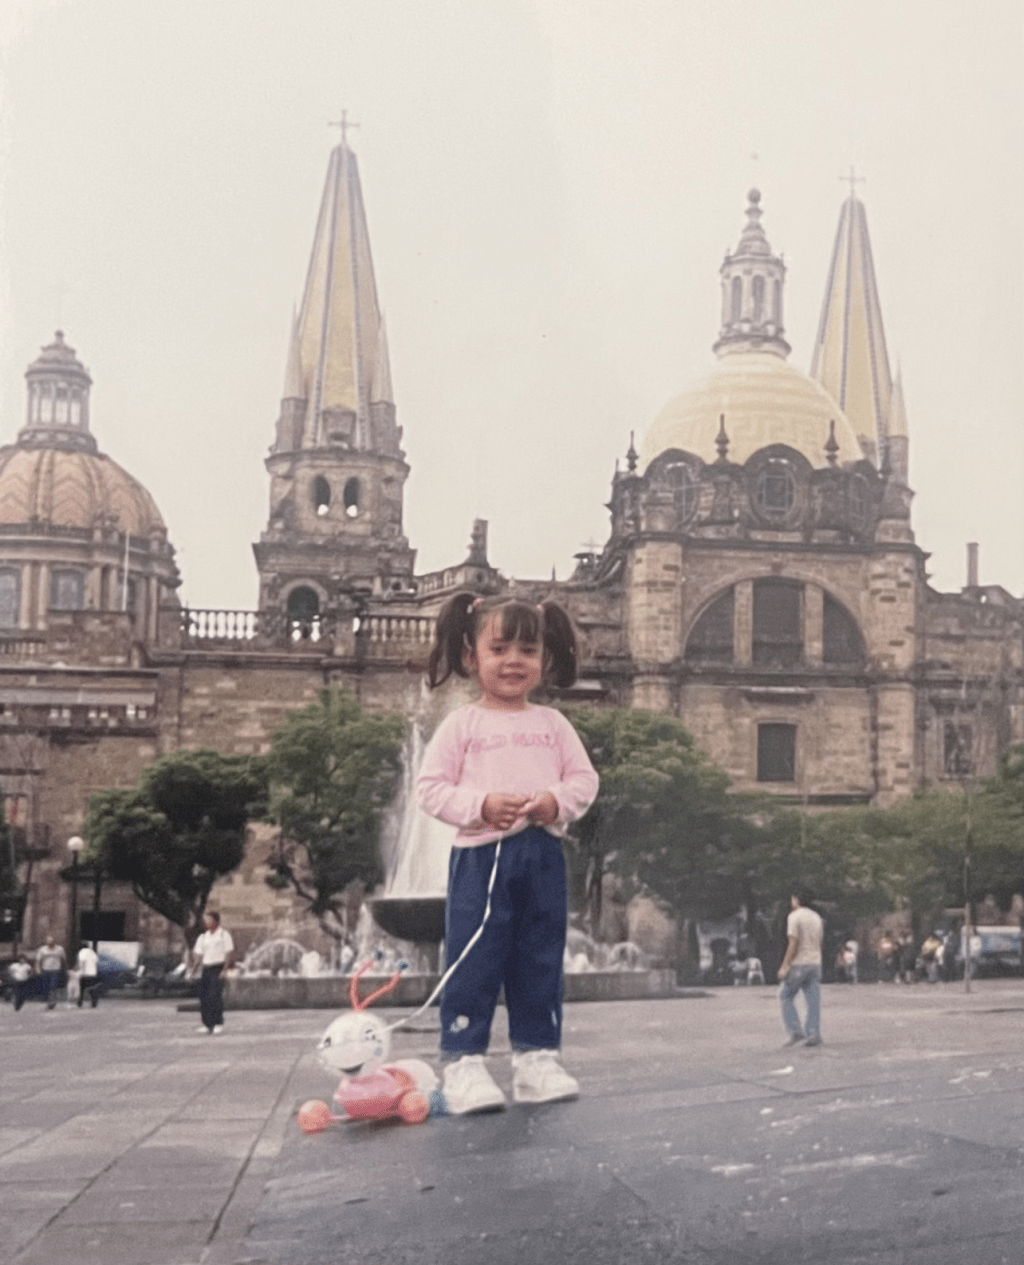 Gonzalez, as a toddler, poses in her family's hometown in Mexico. Growing up, Gonzalez said her family took a trip to Mexico every year in September. Photo courtesy of Priscilla Gonzalez